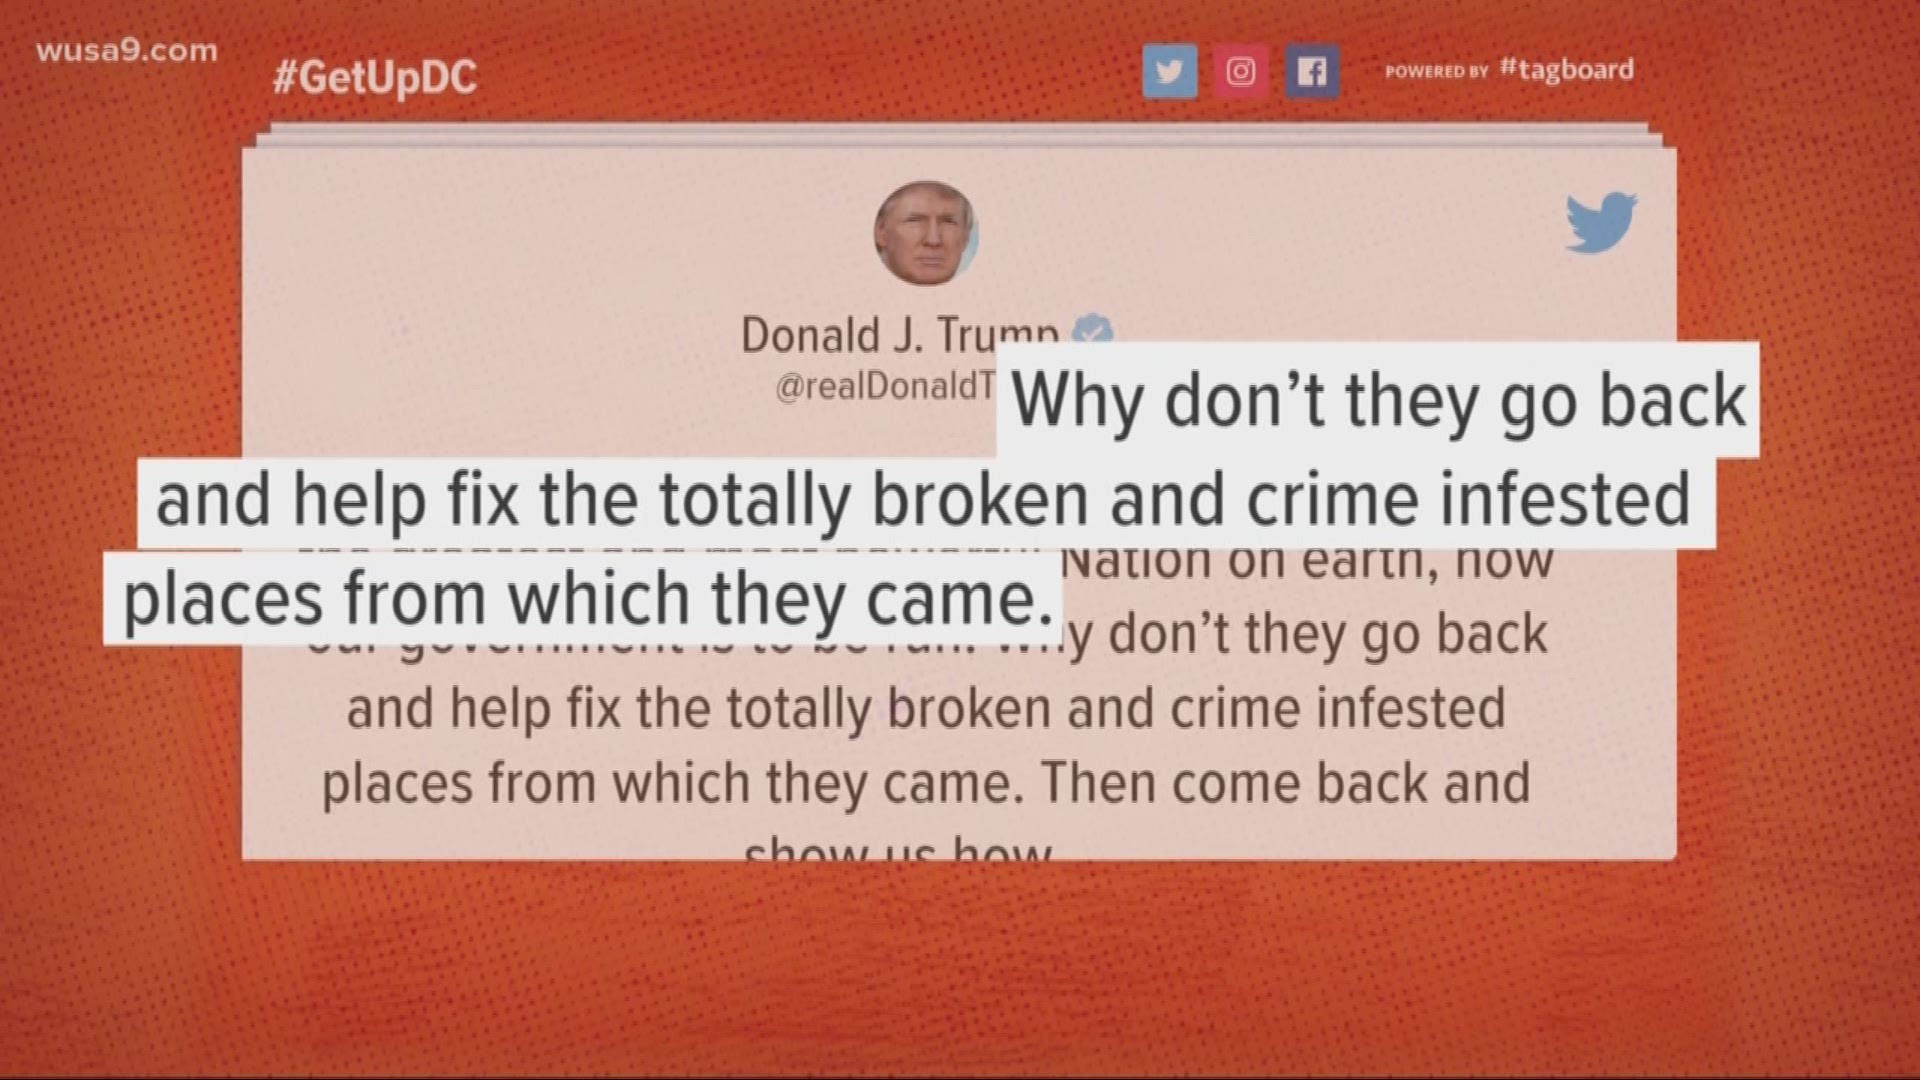 On Sunday, President Trump posted a series of tweets telling Democrat Congresswomen Alexandra Ocasio Cortez, Ilhan Omar, Rashida Talib and Ayanna Pressley to, "go back and help fix the totally broken and crime infested places from which they came" before telling "the United States, the greatest and most powerful Nation on earth" on how to run its government.